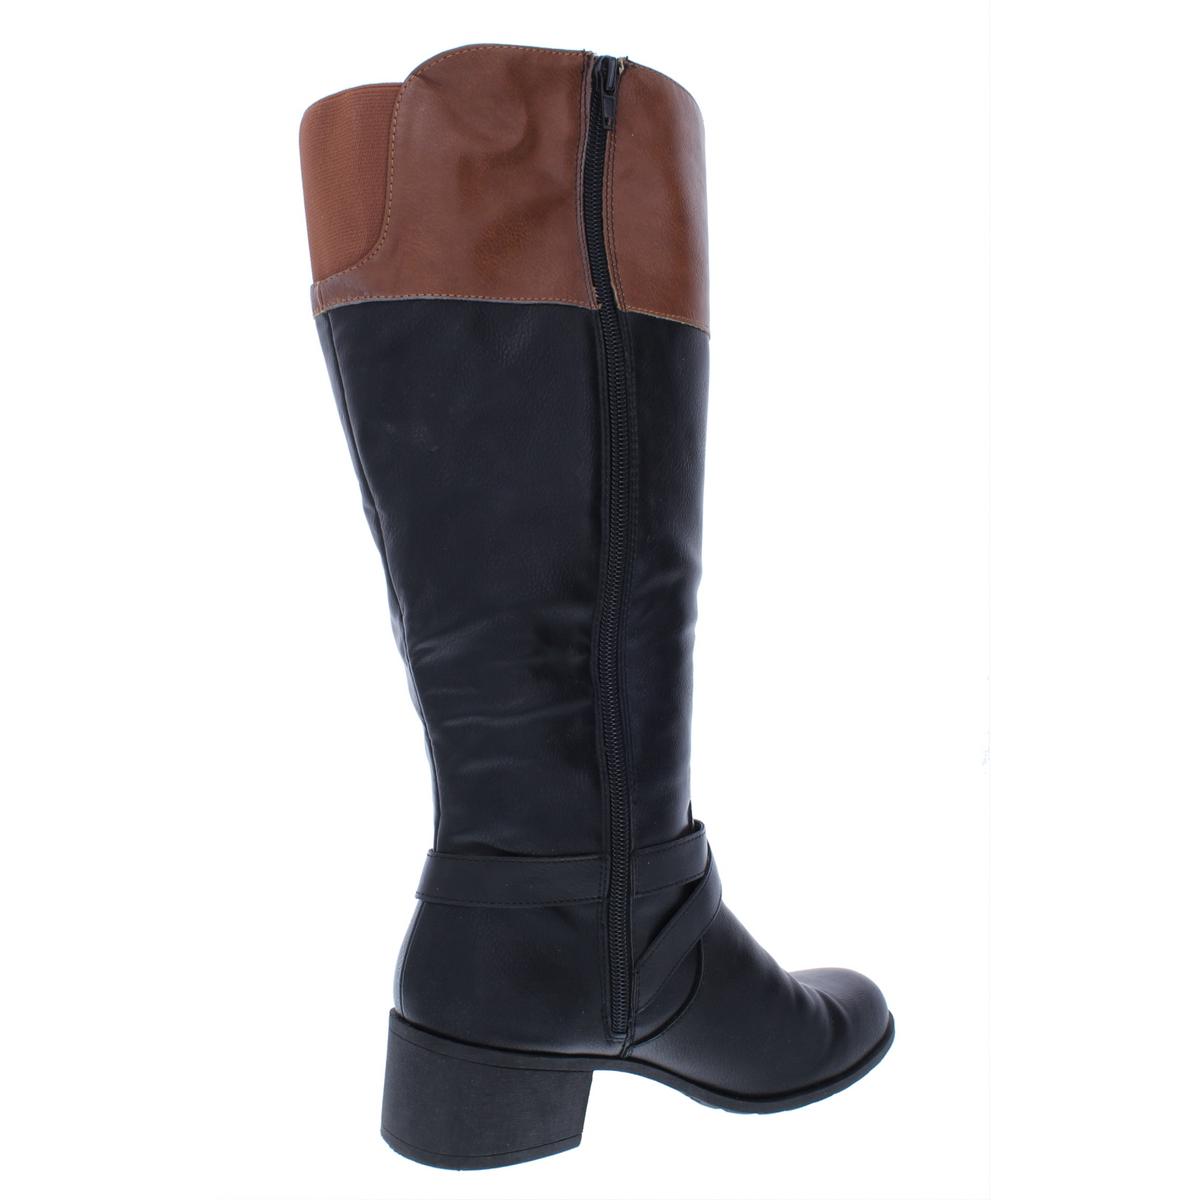 Style & Co. Womens Venesa Wide Calf Faux Leather Riding Boots Shoes BHFO 9769 | eBay